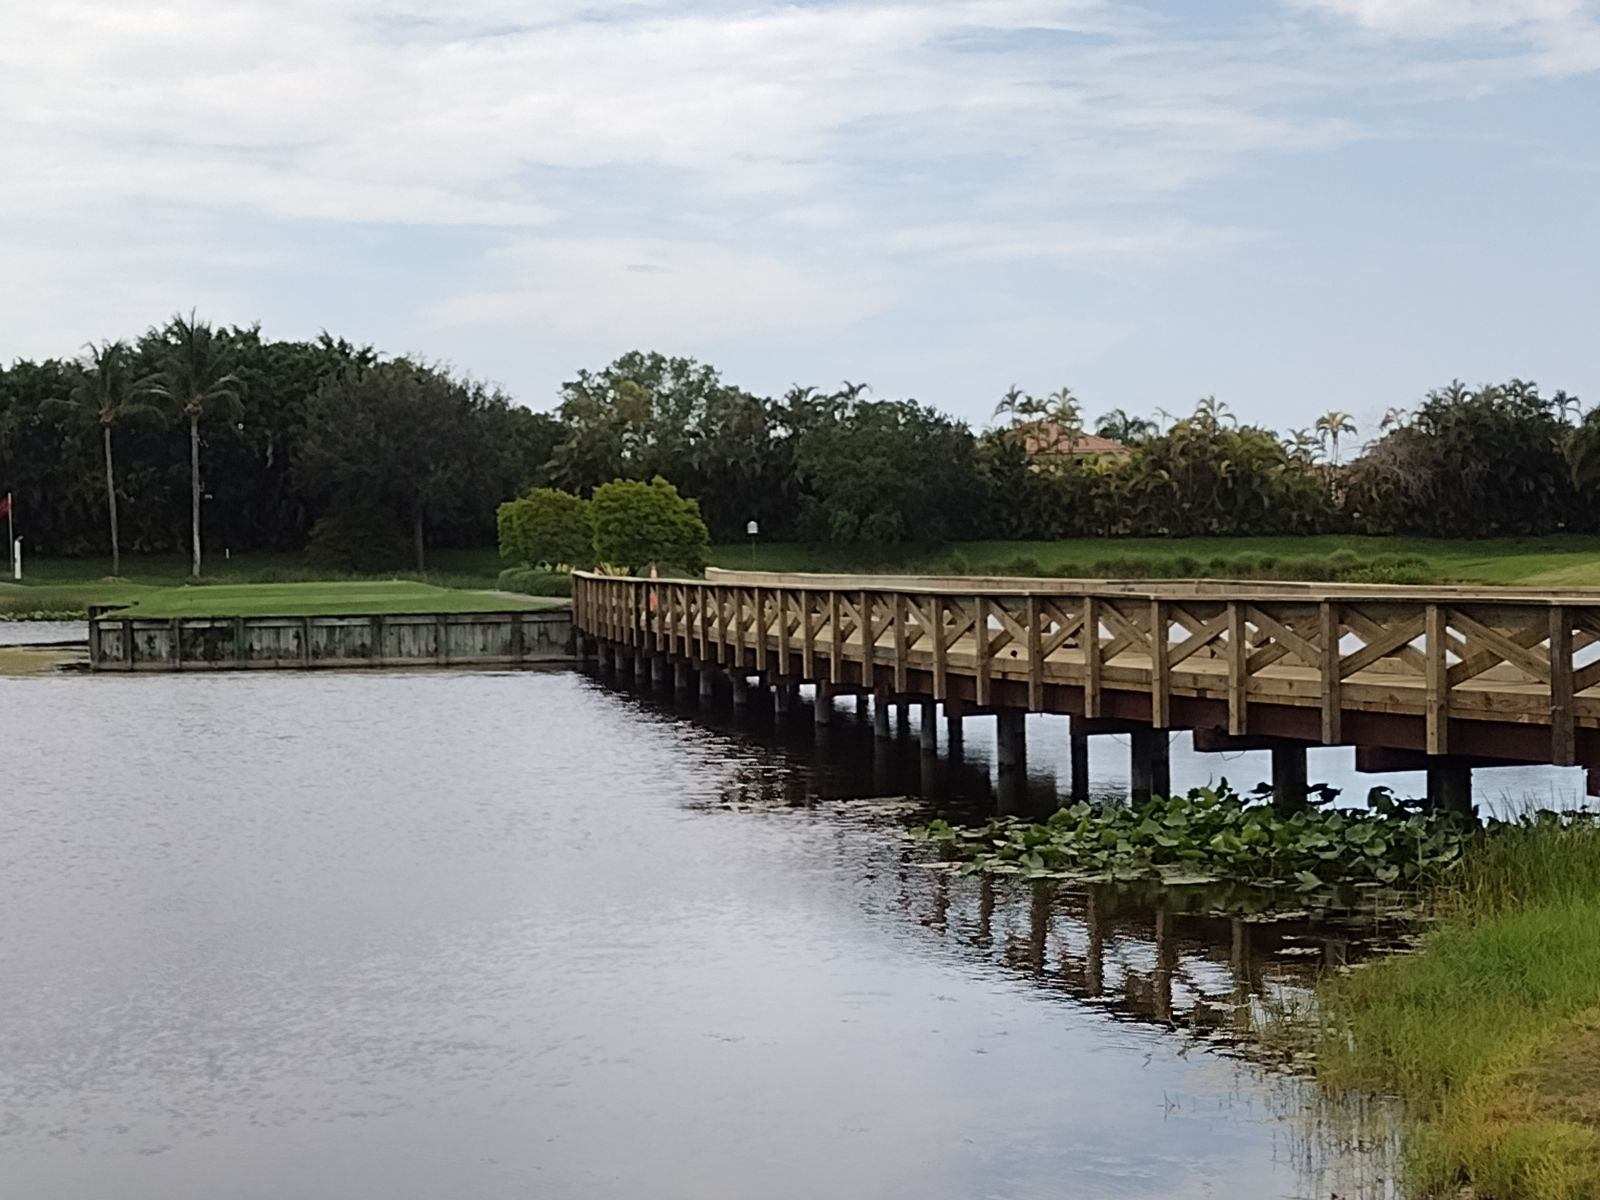 A bridge over water with trees in the background.